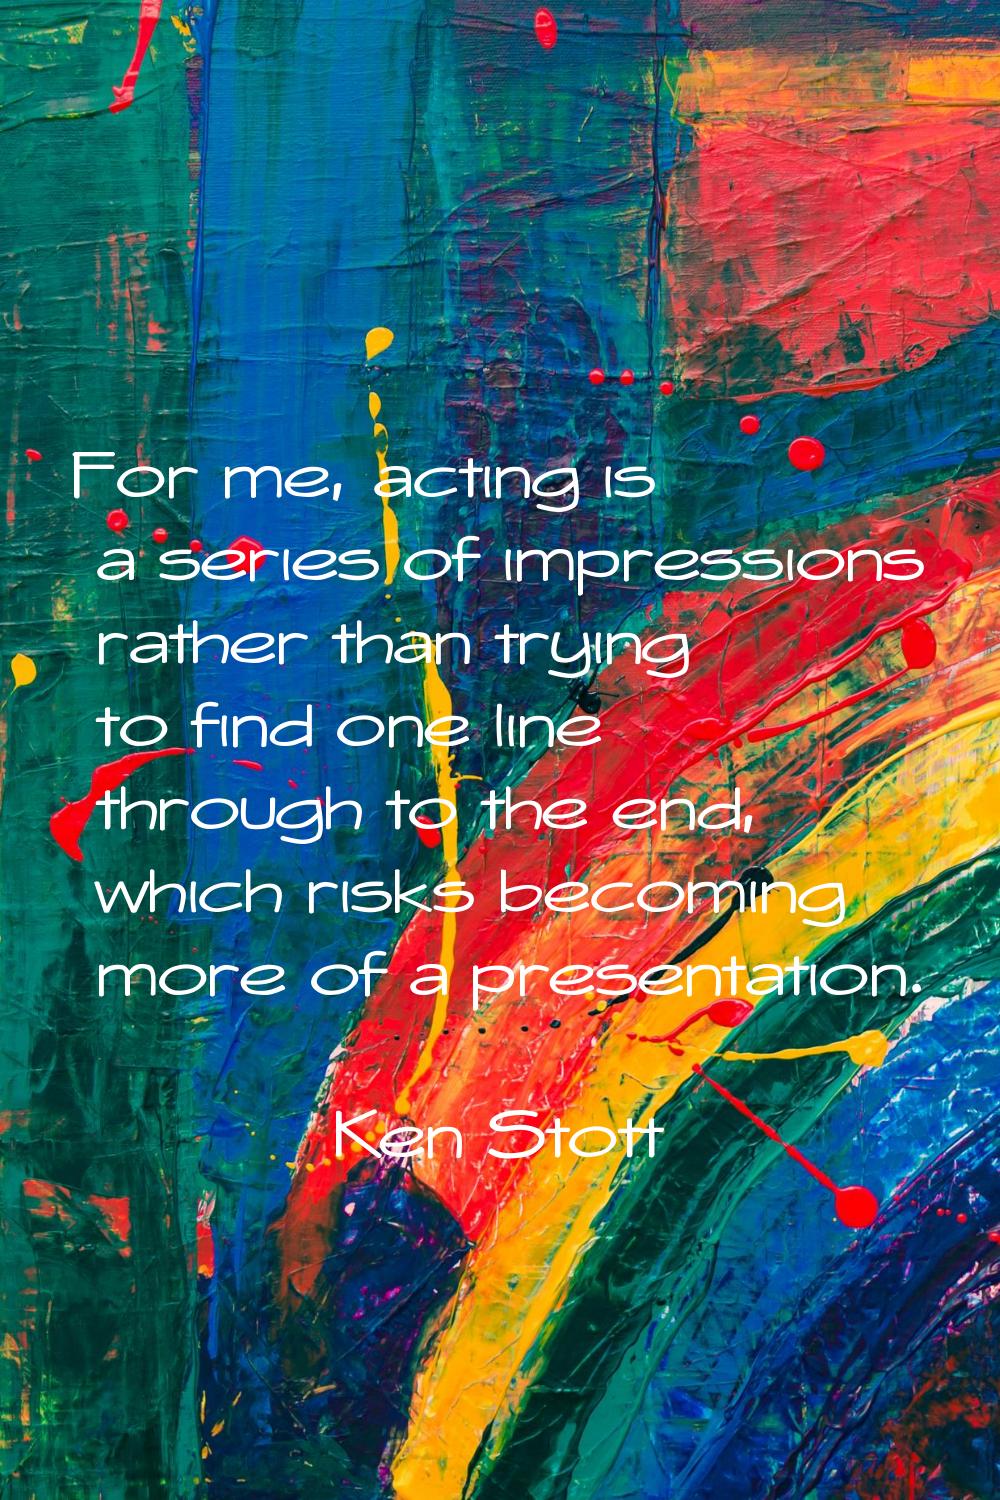 For me, acting is a series of impressions rather than trying to find one line through to the end, w